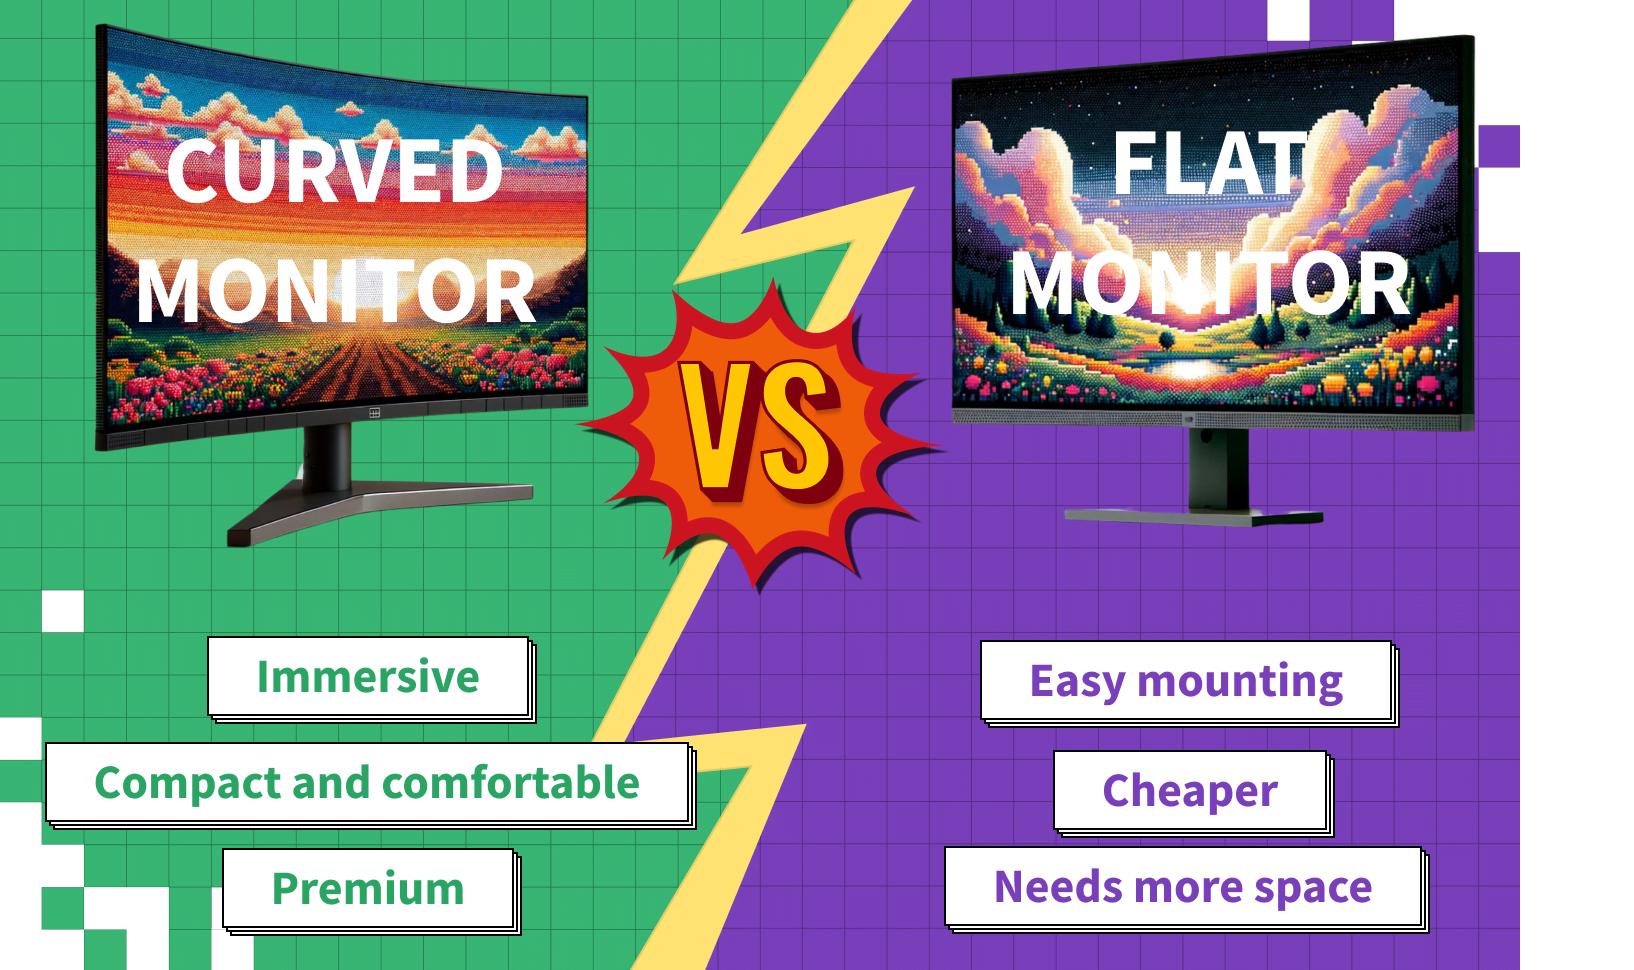 Curved Monitor vs Flat